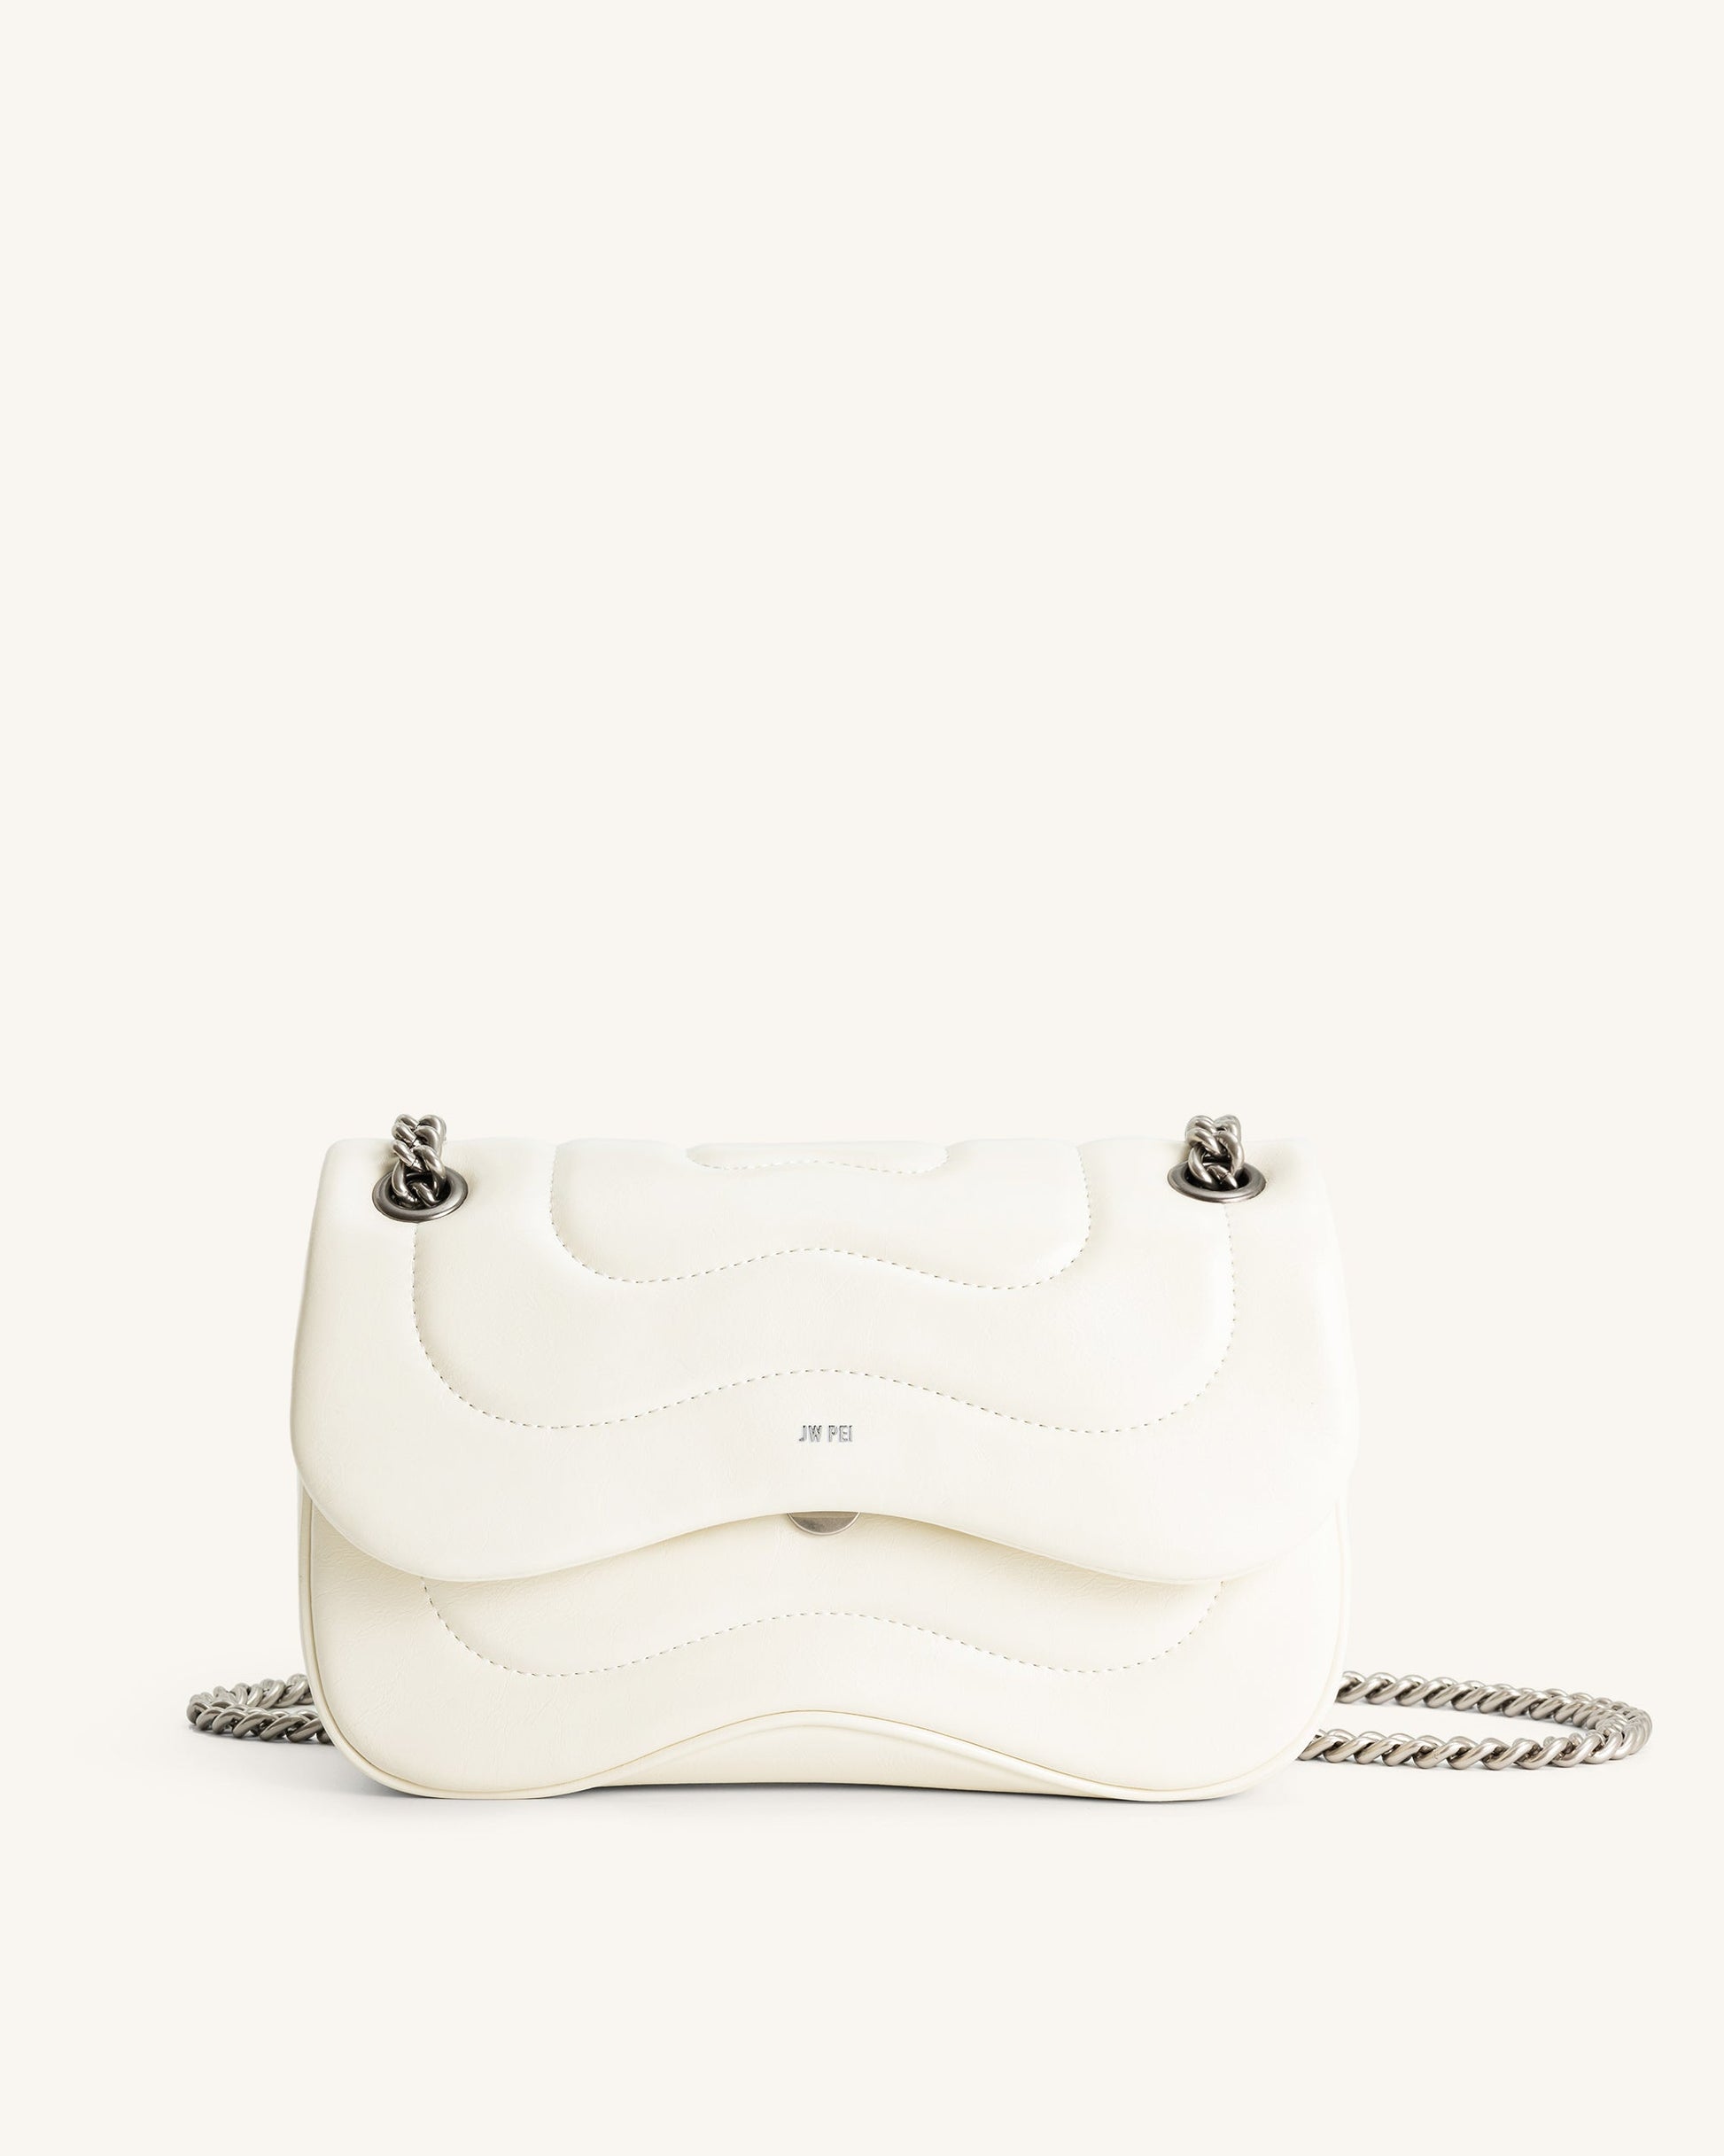 Tina Quilted Chain Crossbody - Ivory - JW PEI Brazil